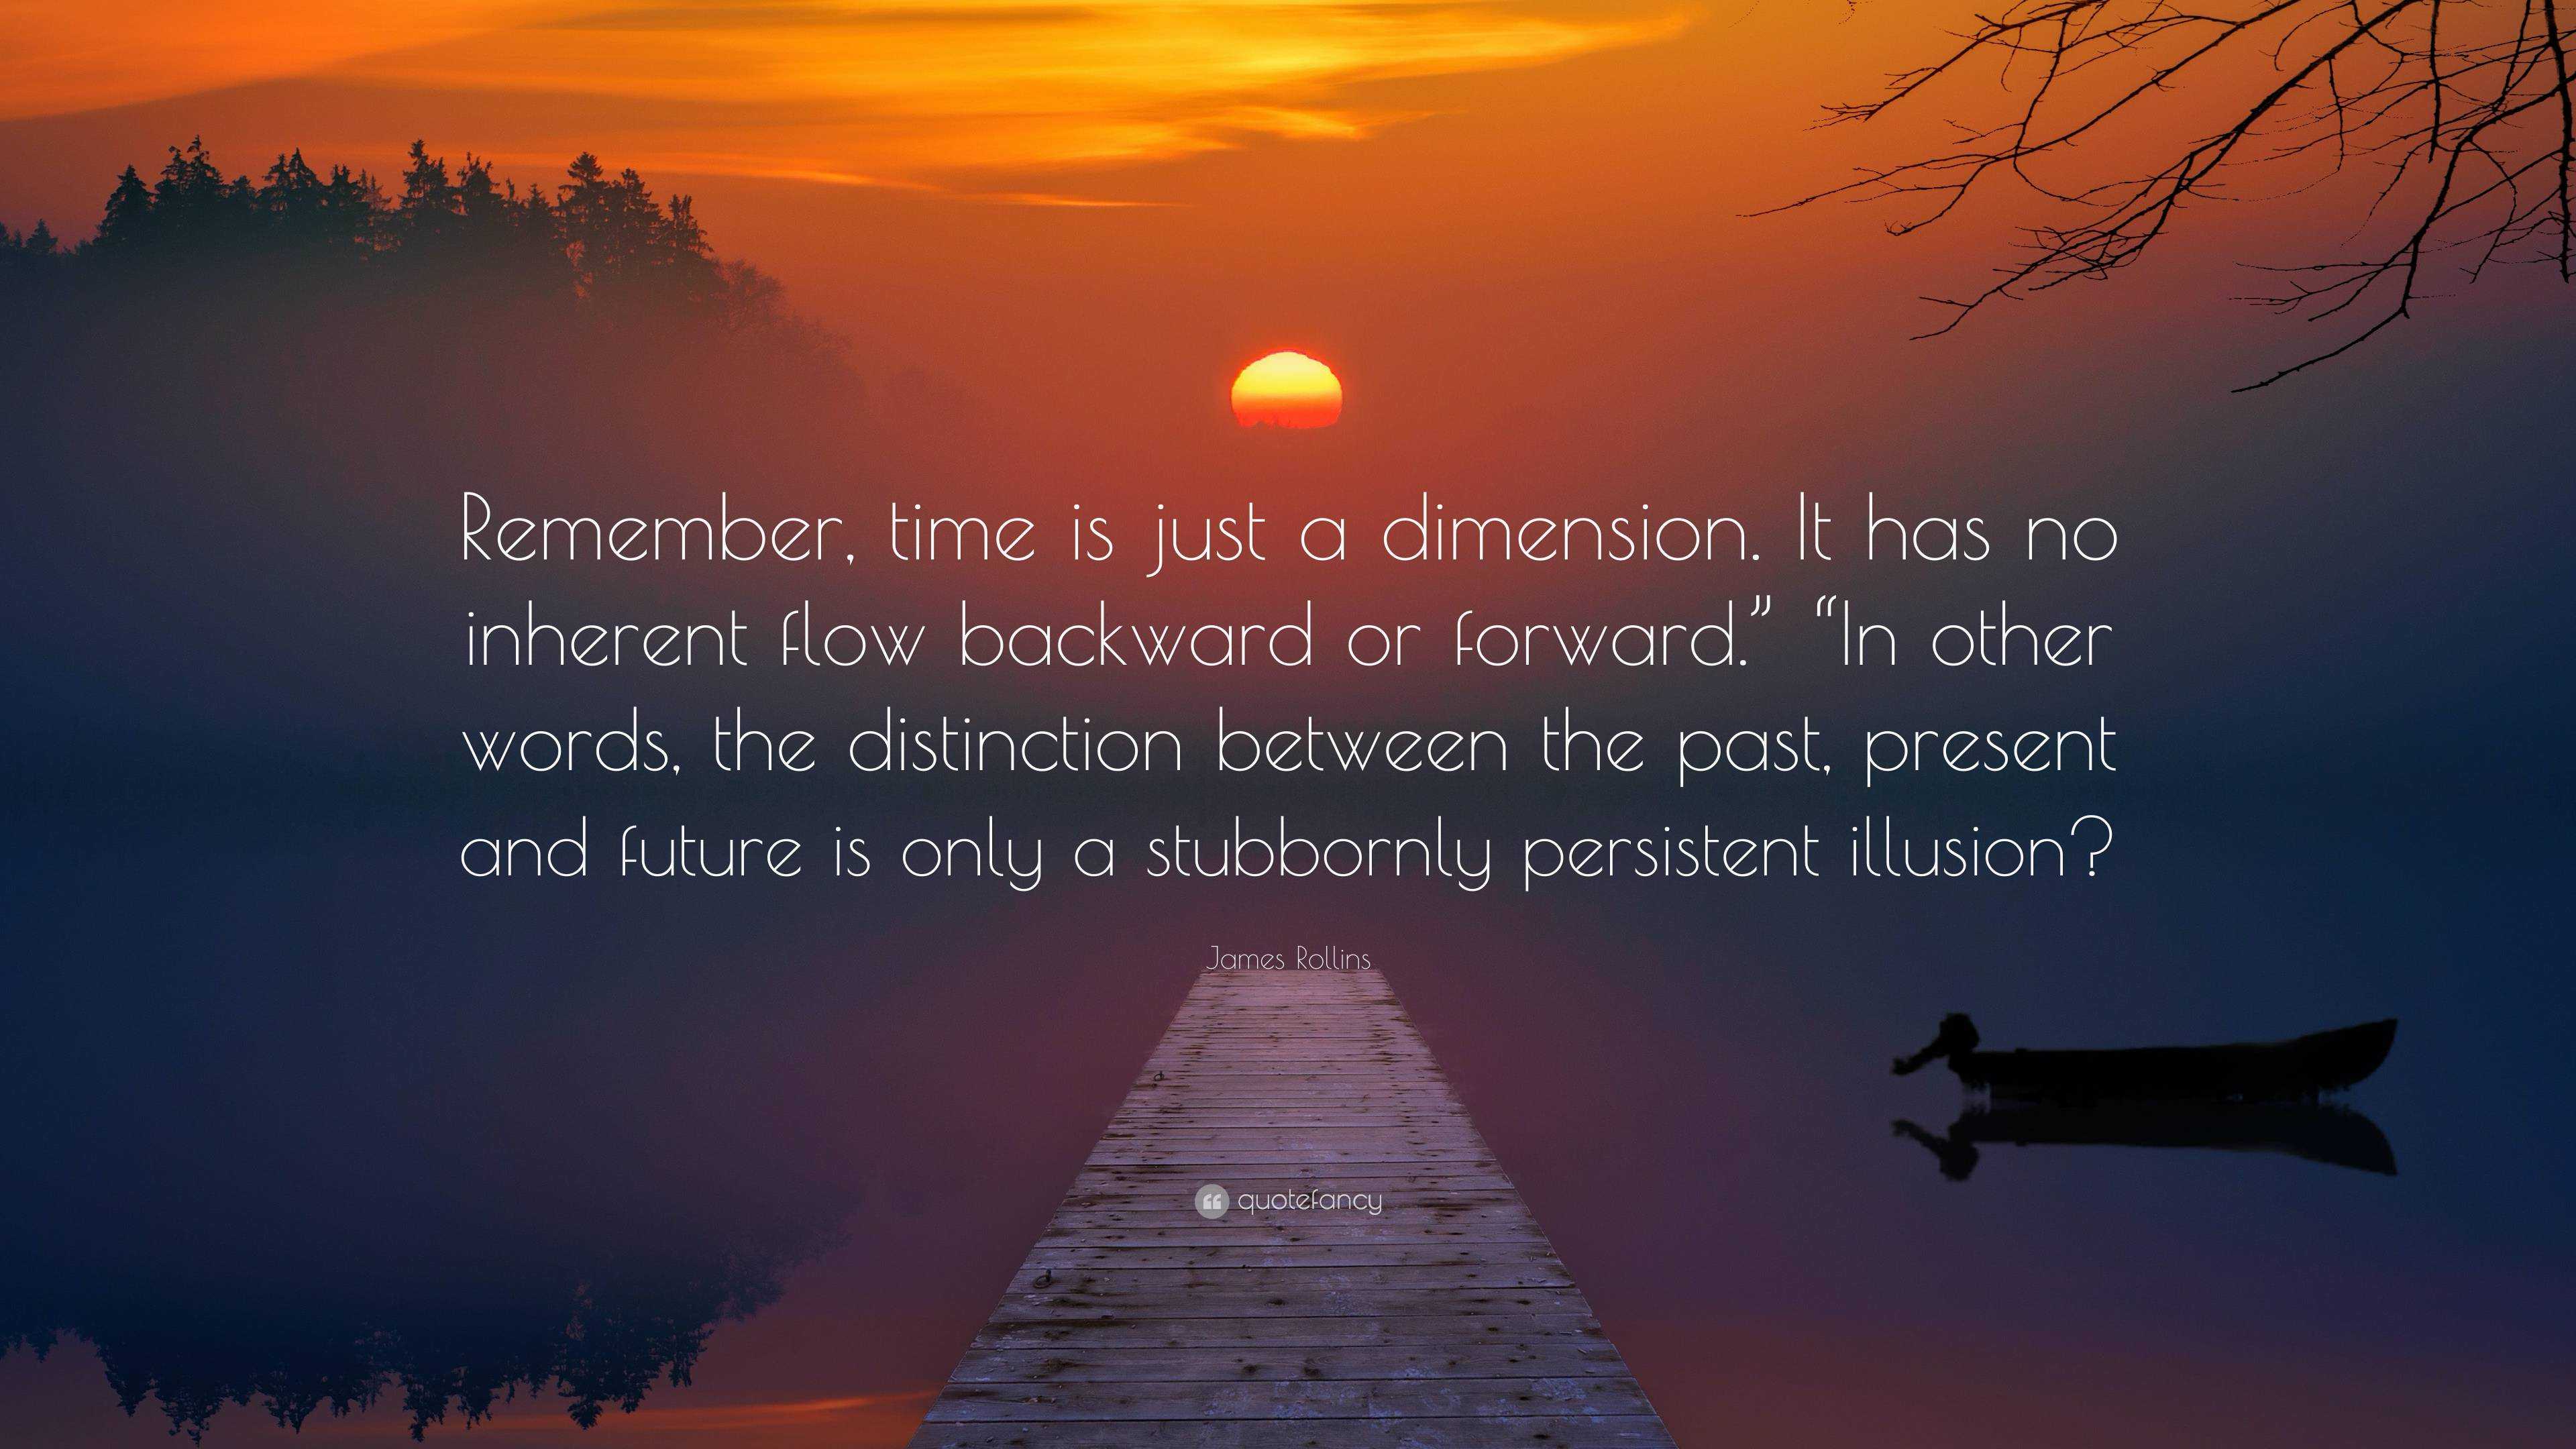 James Rollins Quote Remember Time Is Just A Dimension It Has No Inherent Flow Backward Or Forward In Other Words The Distinction Betwe 2 Wallpapers Quotefancy